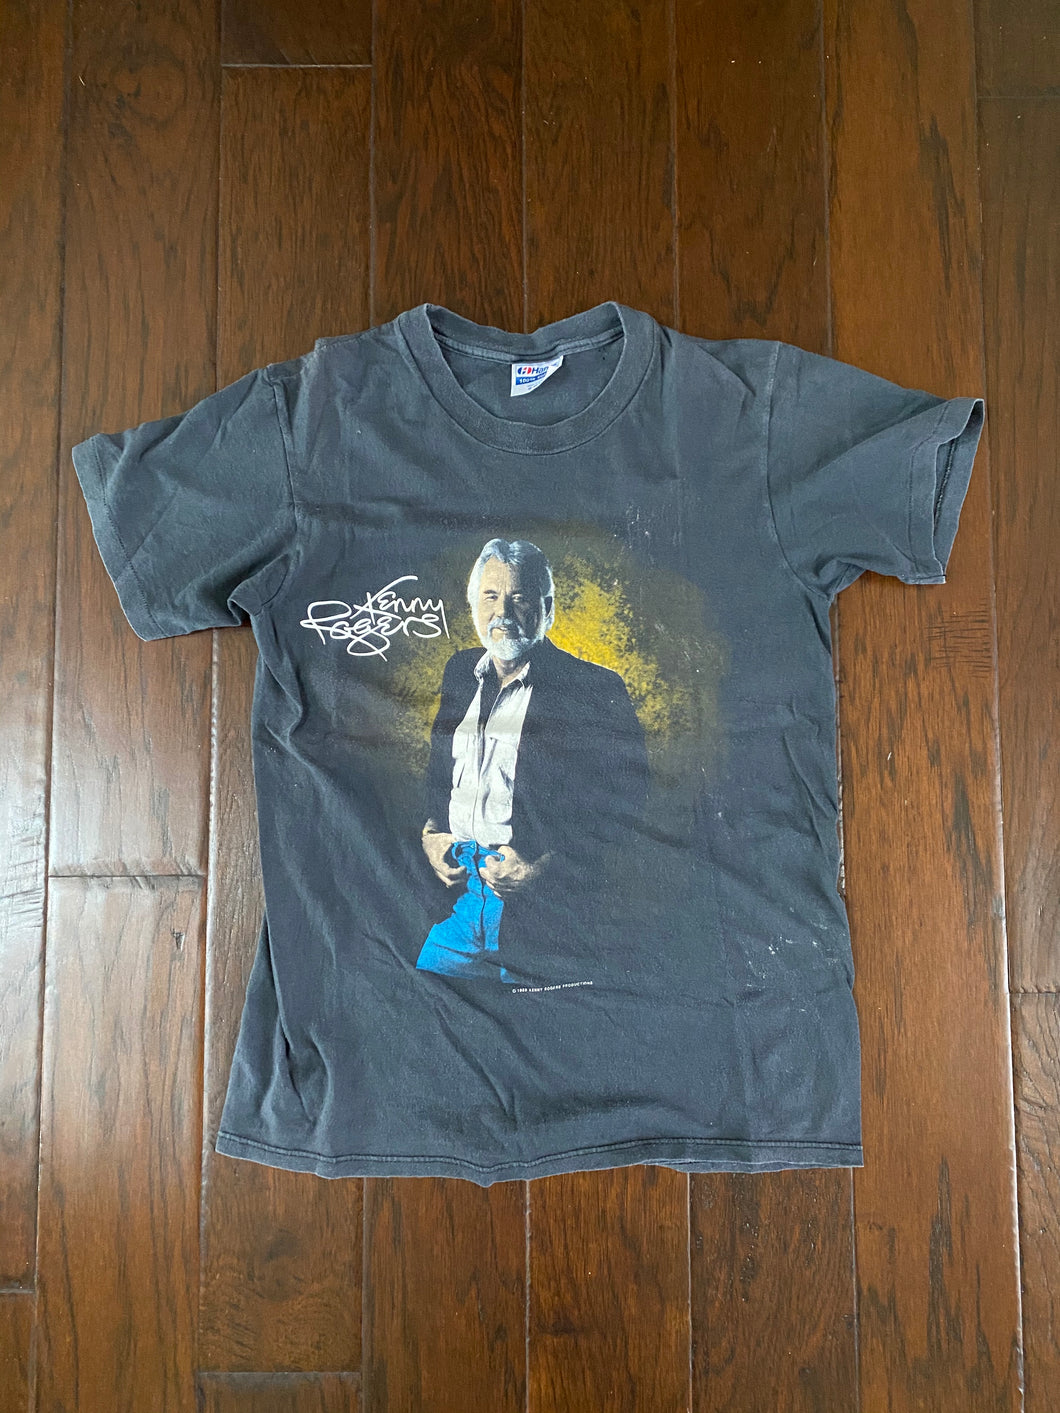 Kenny Rogers 1989 Vintage Distressed T-shirt